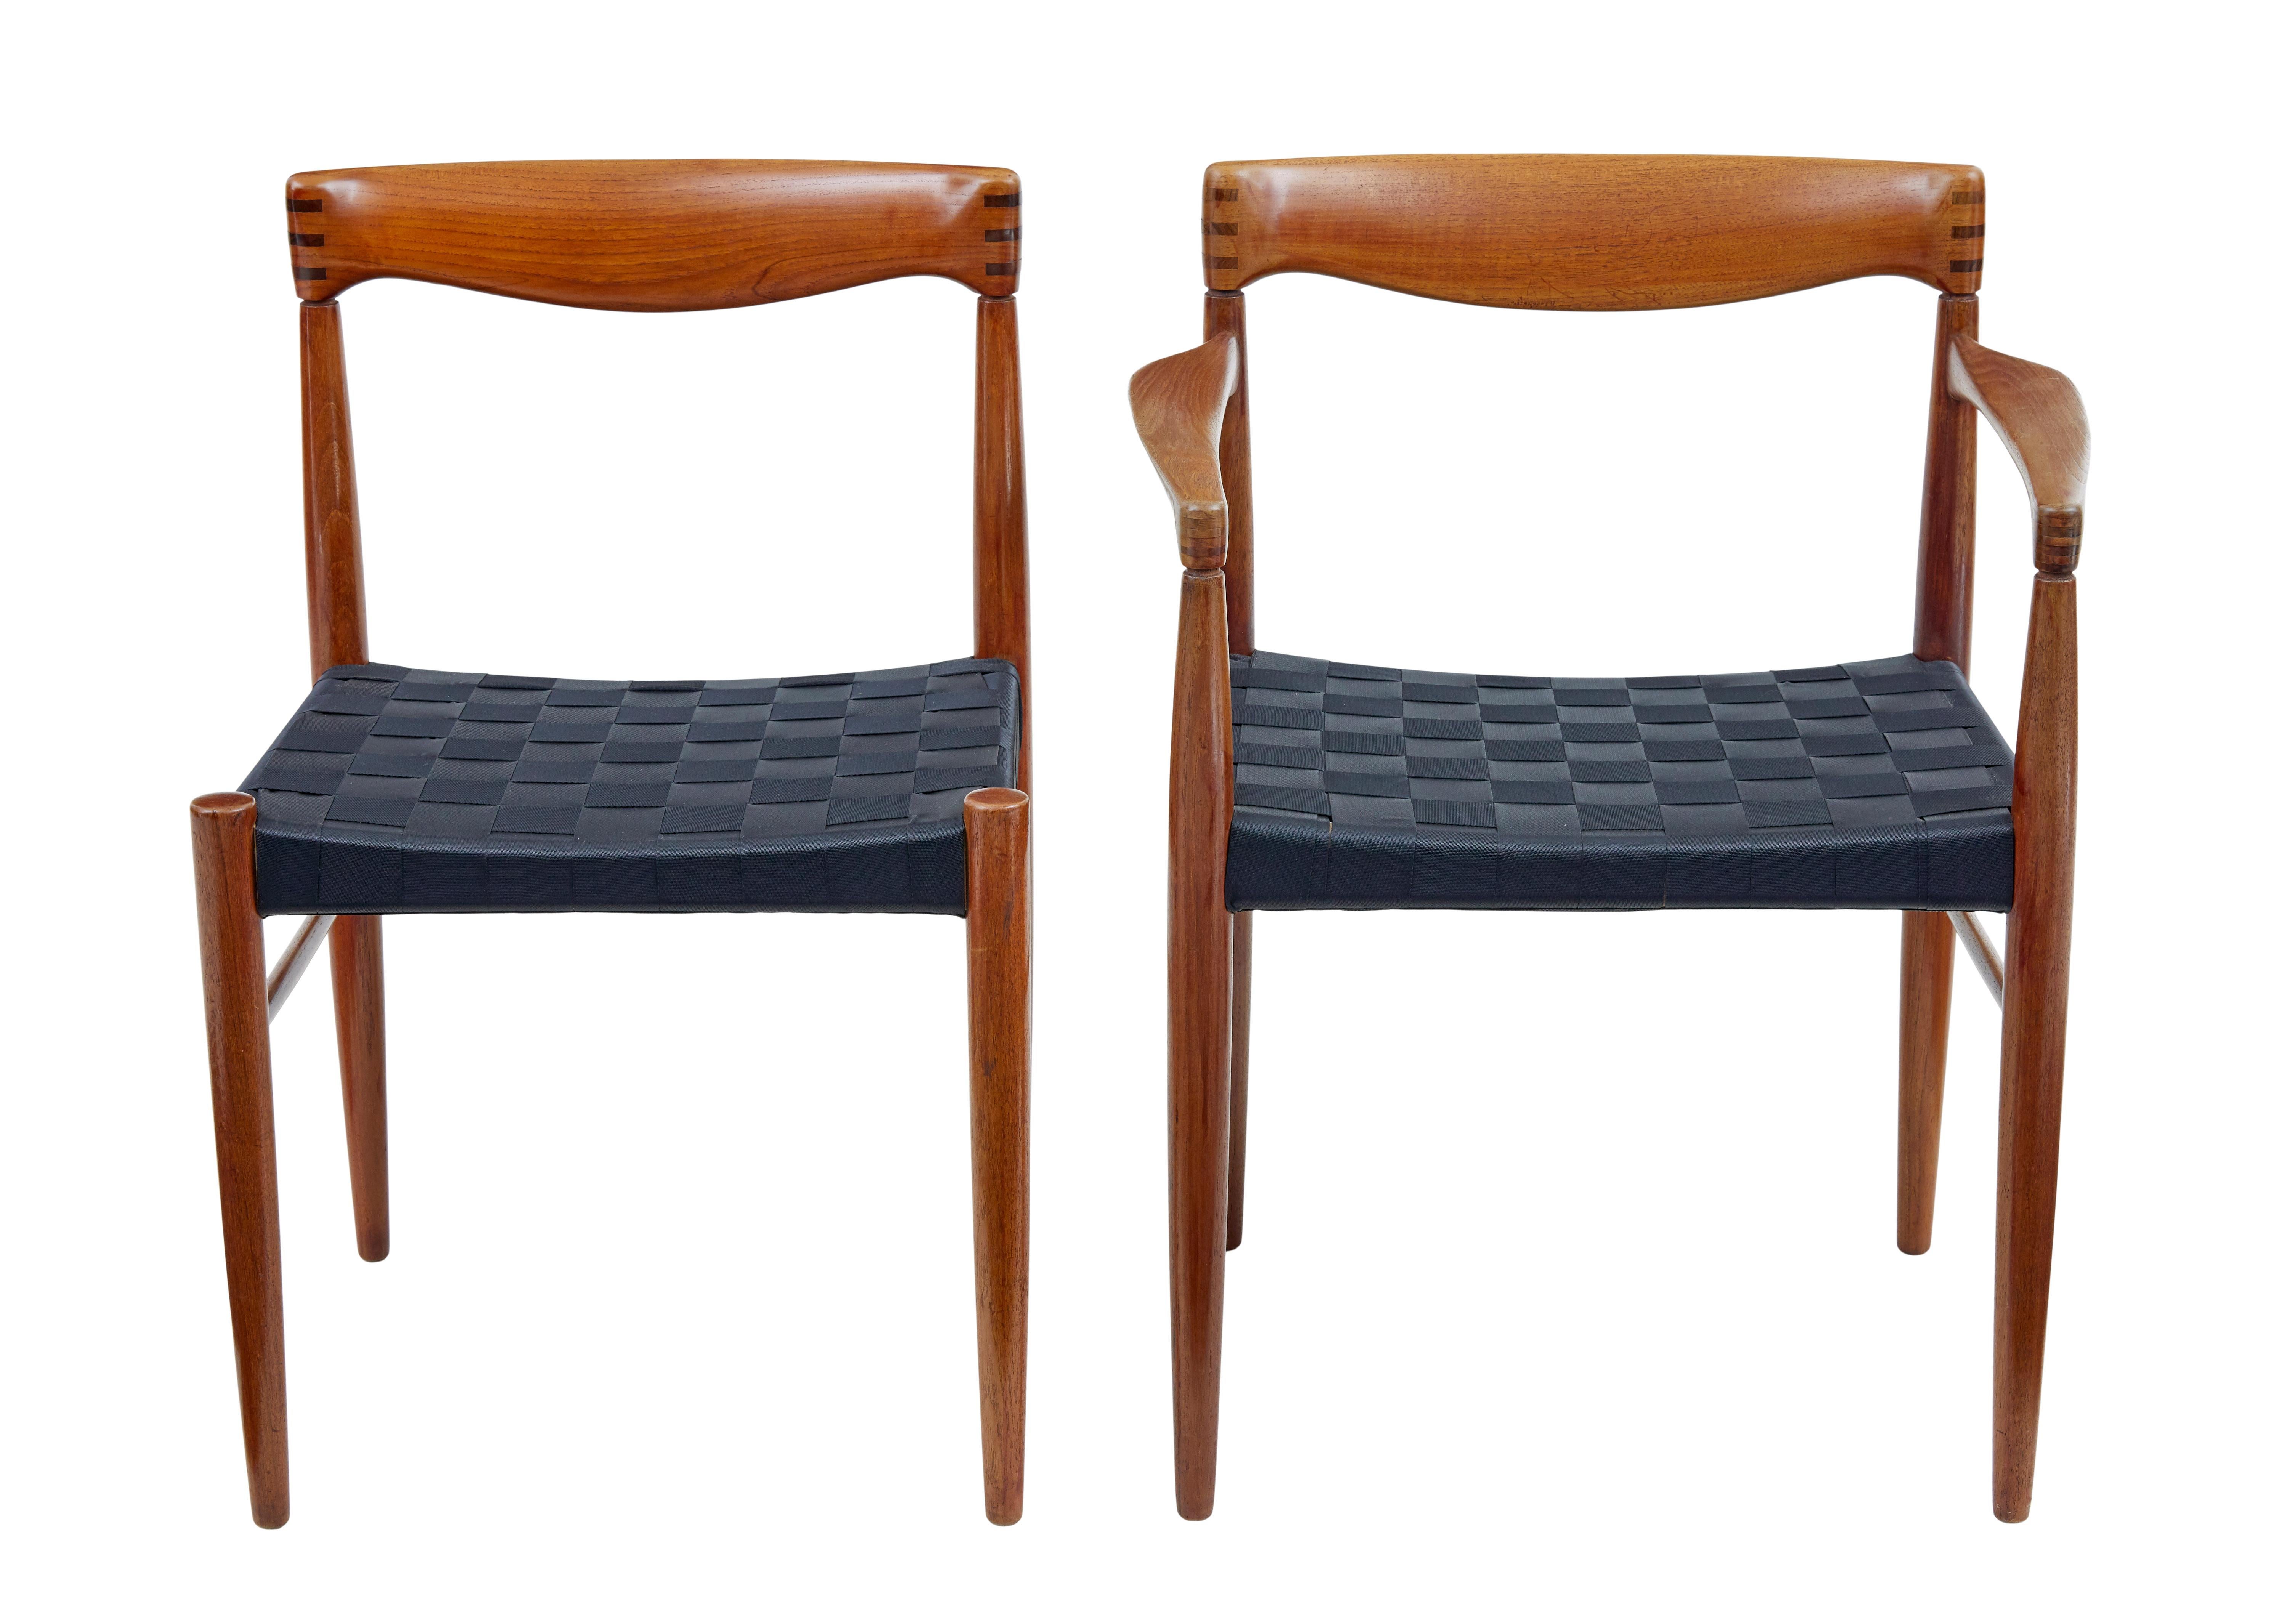 Set of 10 mid century dining chairs by bramin circa 1960.

Rare to find in such a large matching set.

Fine quality and well regarded set of dining chairs designed by H.W Klein for Bramin of Denmark.  Set comprises of 2 armchairs and 8 single